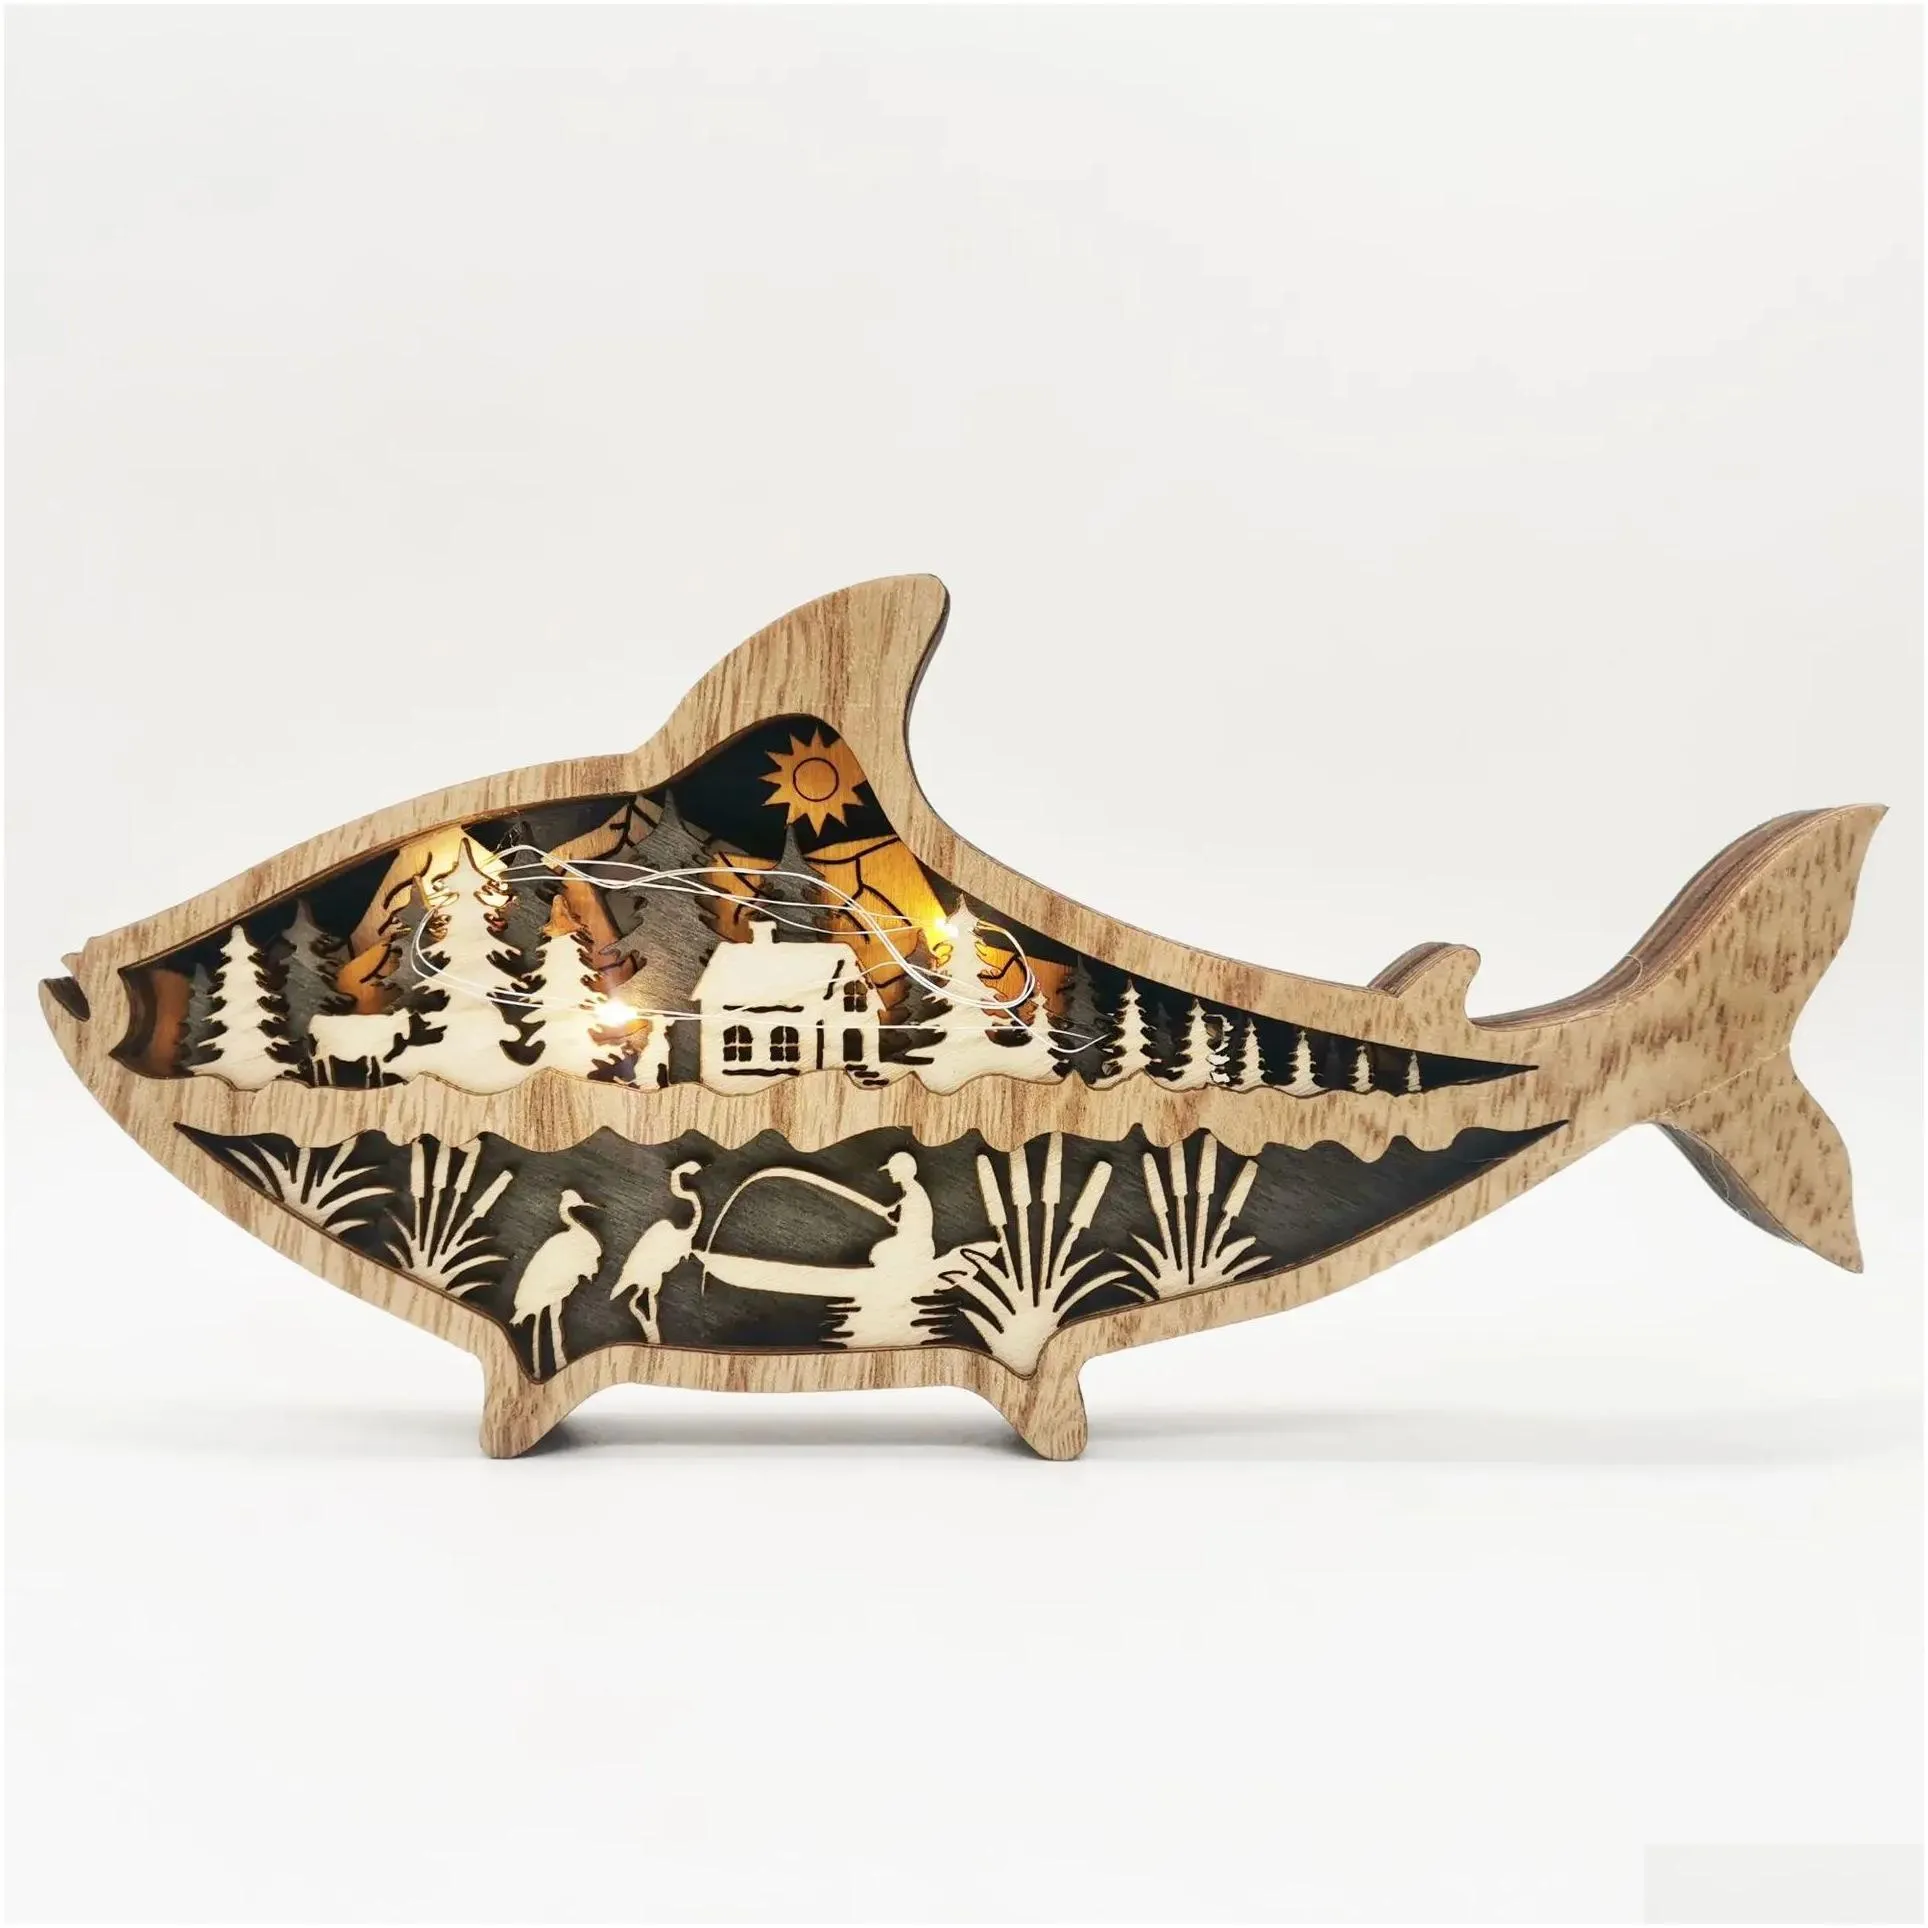 Tools New Marine Animal Wooden Handicraft Creative Marine Wind Wooden Carving Fish Table Decoration With Light 3D In Home Room